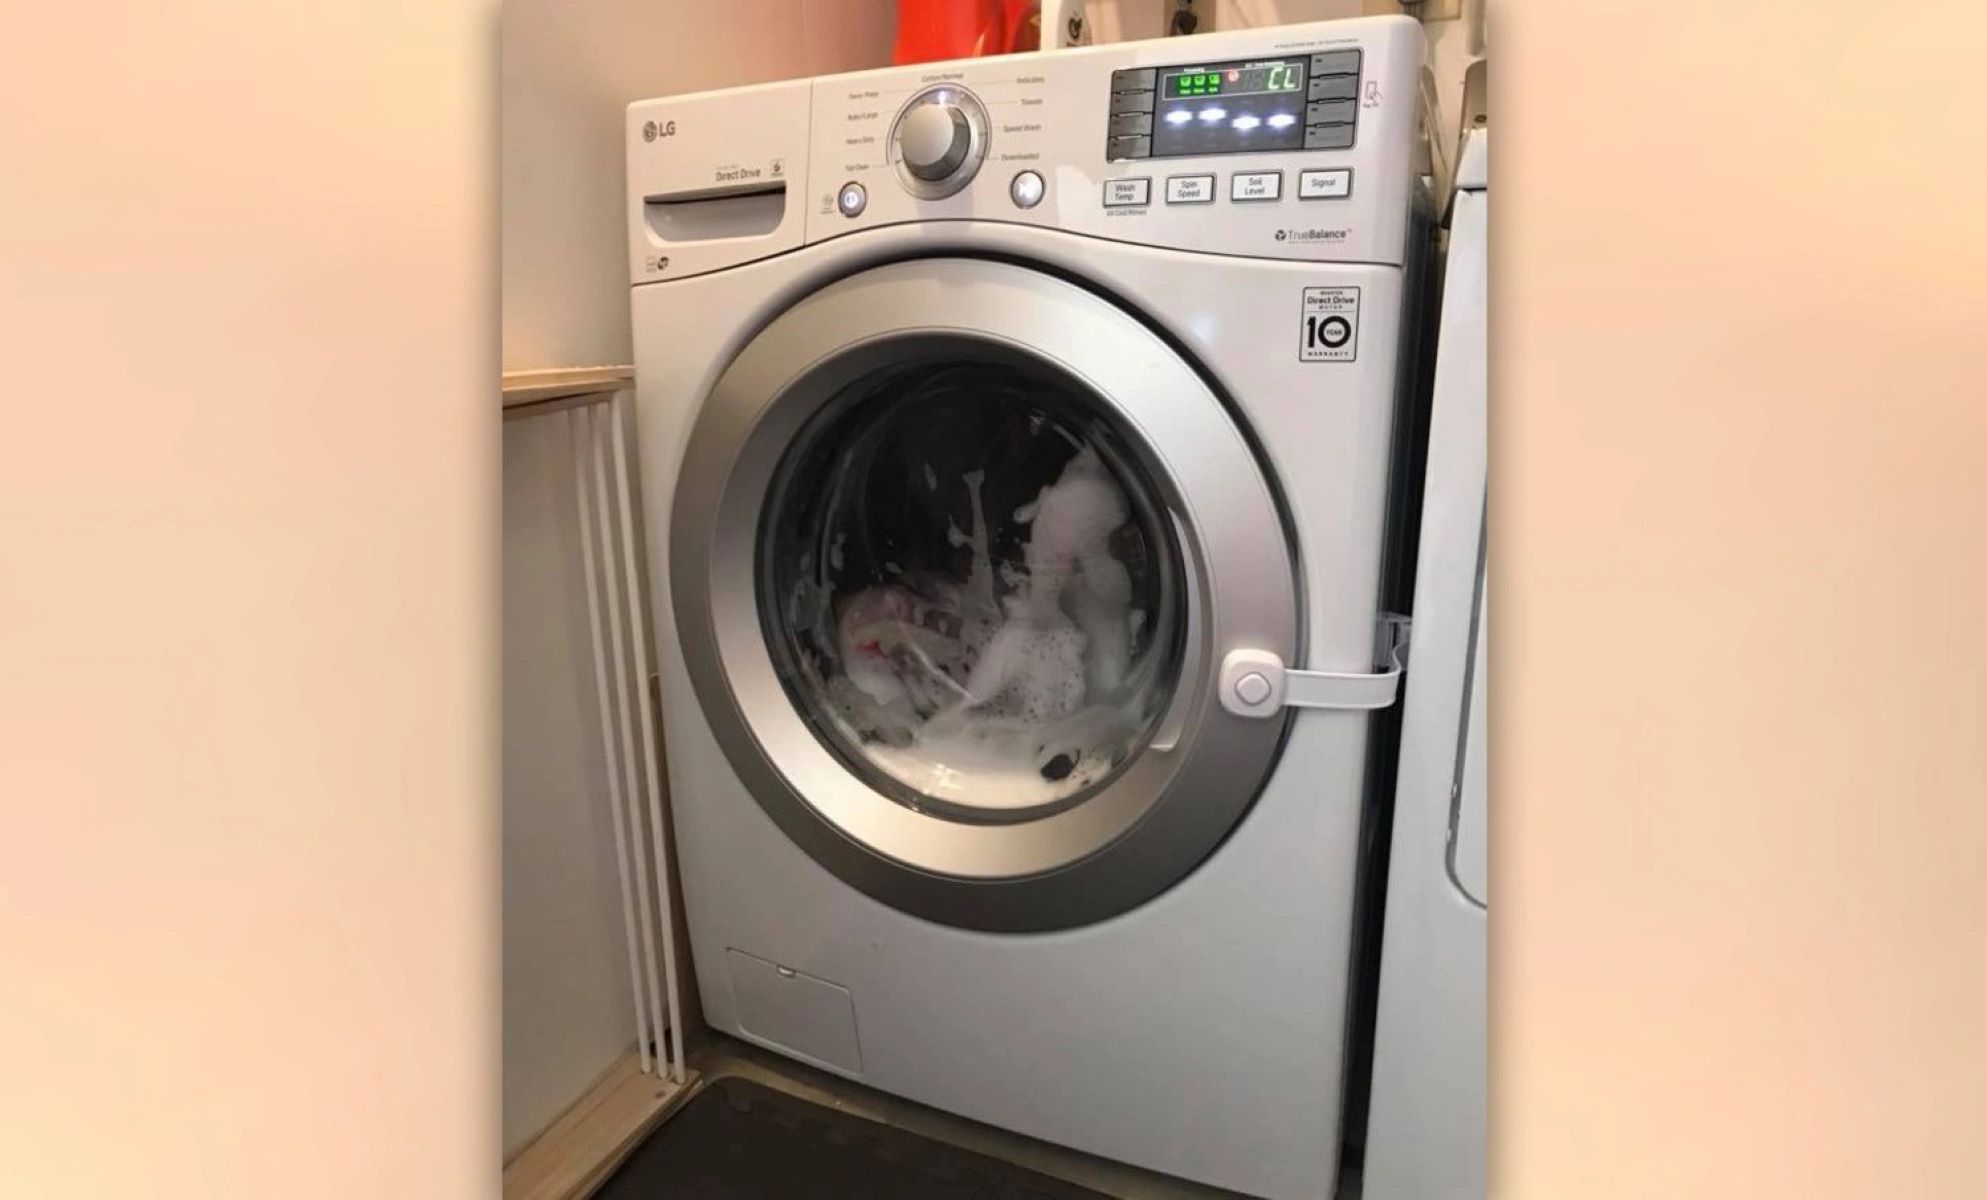 How To Childproof A Washing Machine